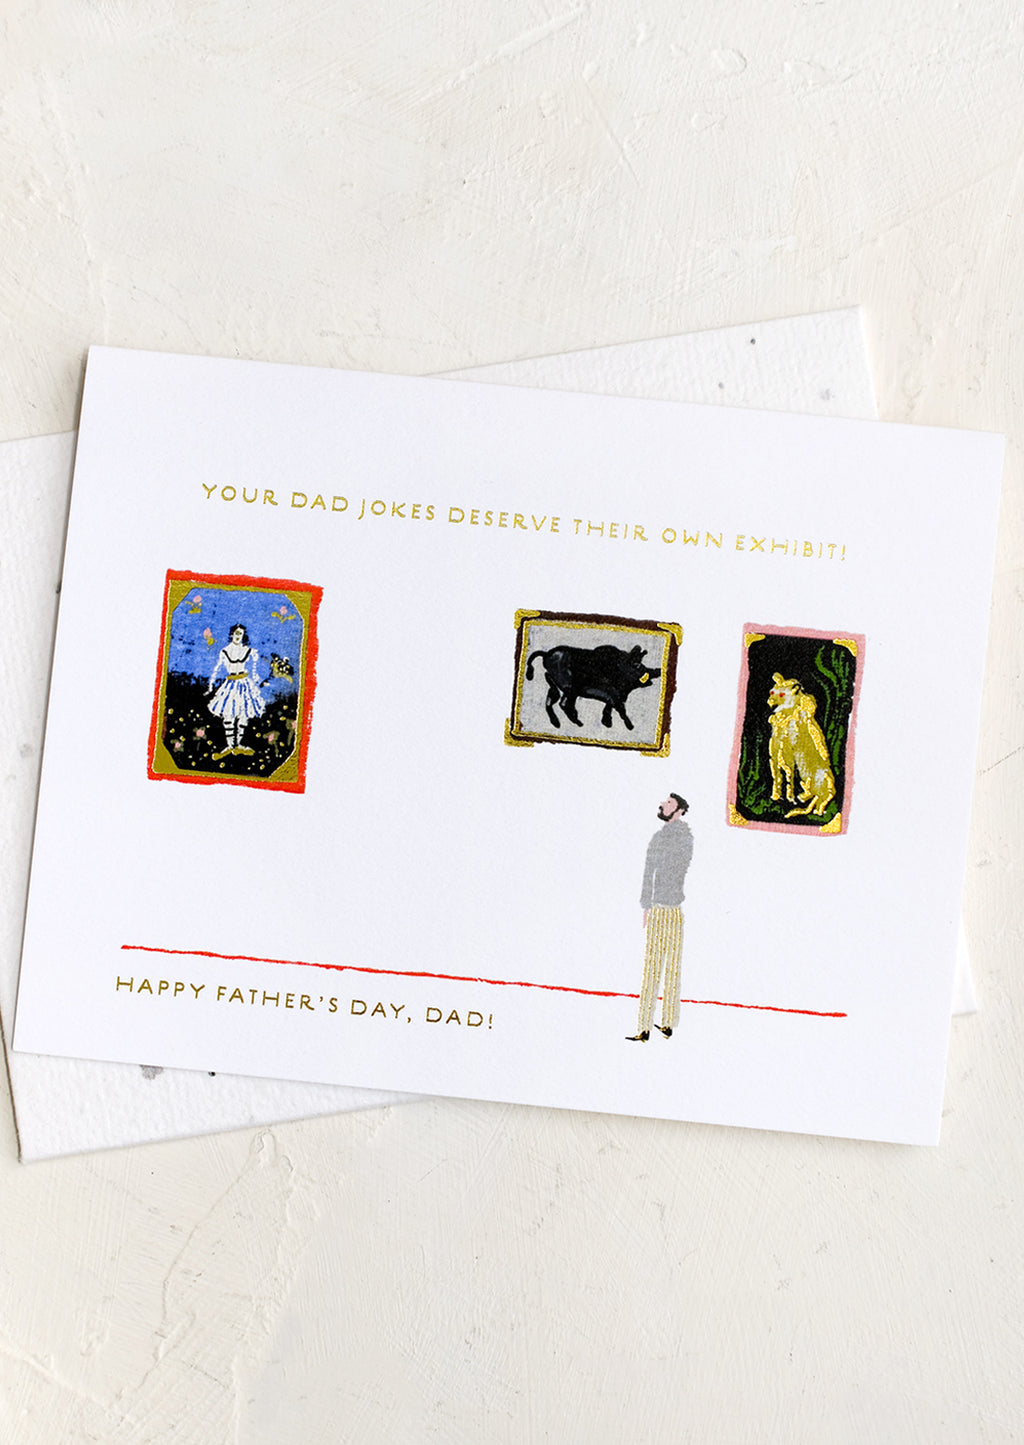 1: A card with image of man at museum, text reads "Your Dad Jokes Deserve Their Own Exhibit! Happy Father's Day".